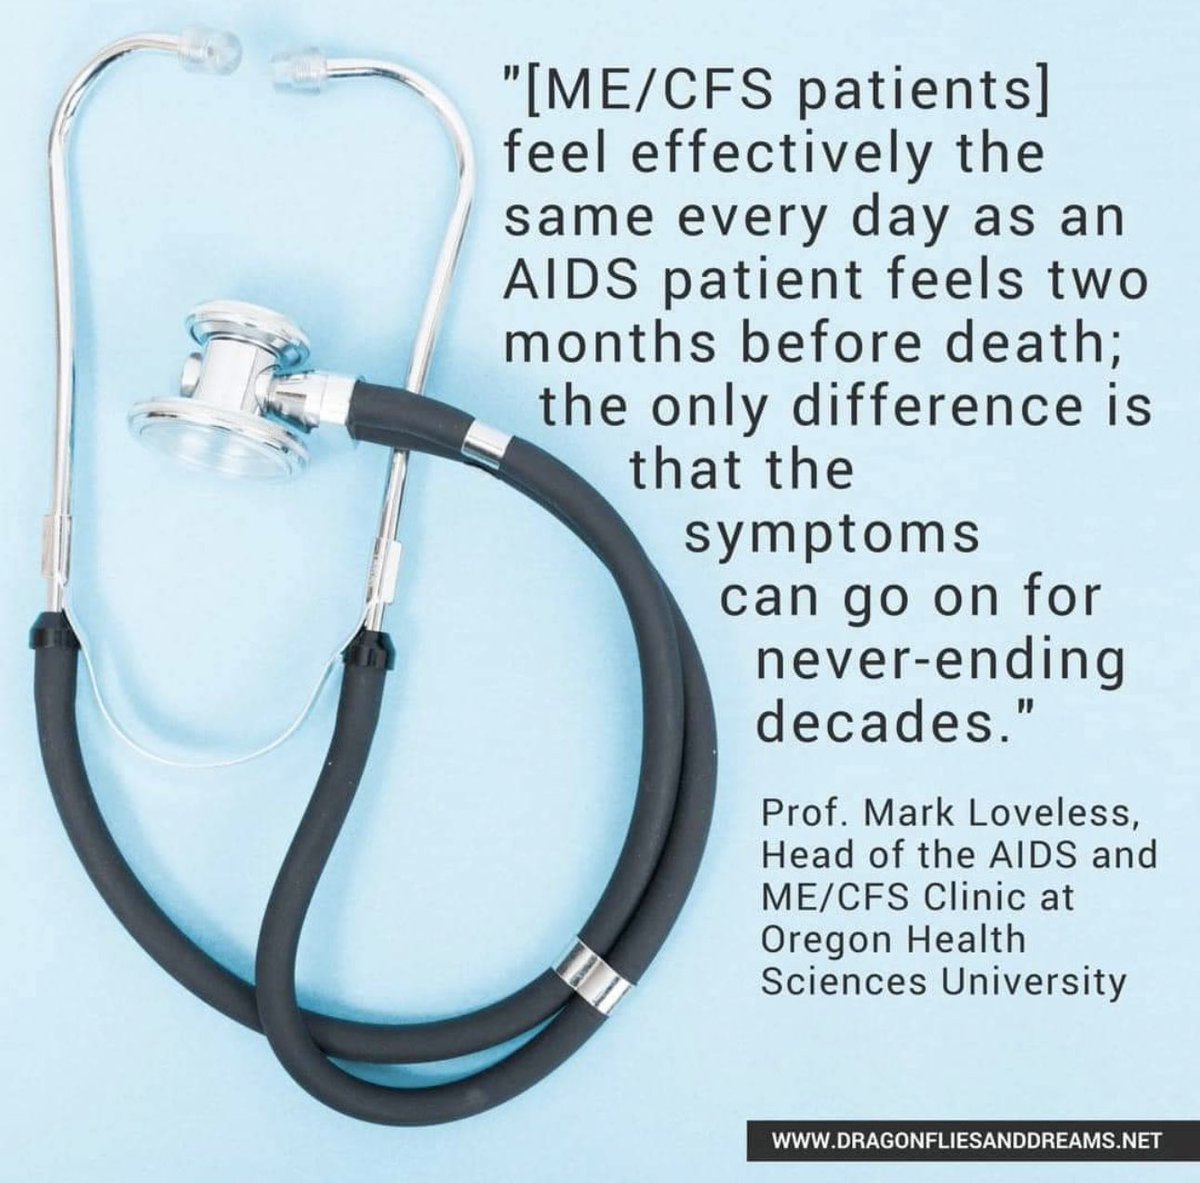 “ME/CFS patients feel effectively the same every day as an AIDS patient feels two months before death; the only difference is that the symptoms can go on for never-ending decades.” Prof. Mark Loveless, Head of the AIDS and ME/CFS Clinic at Oregon Health Sciences #MECFS…